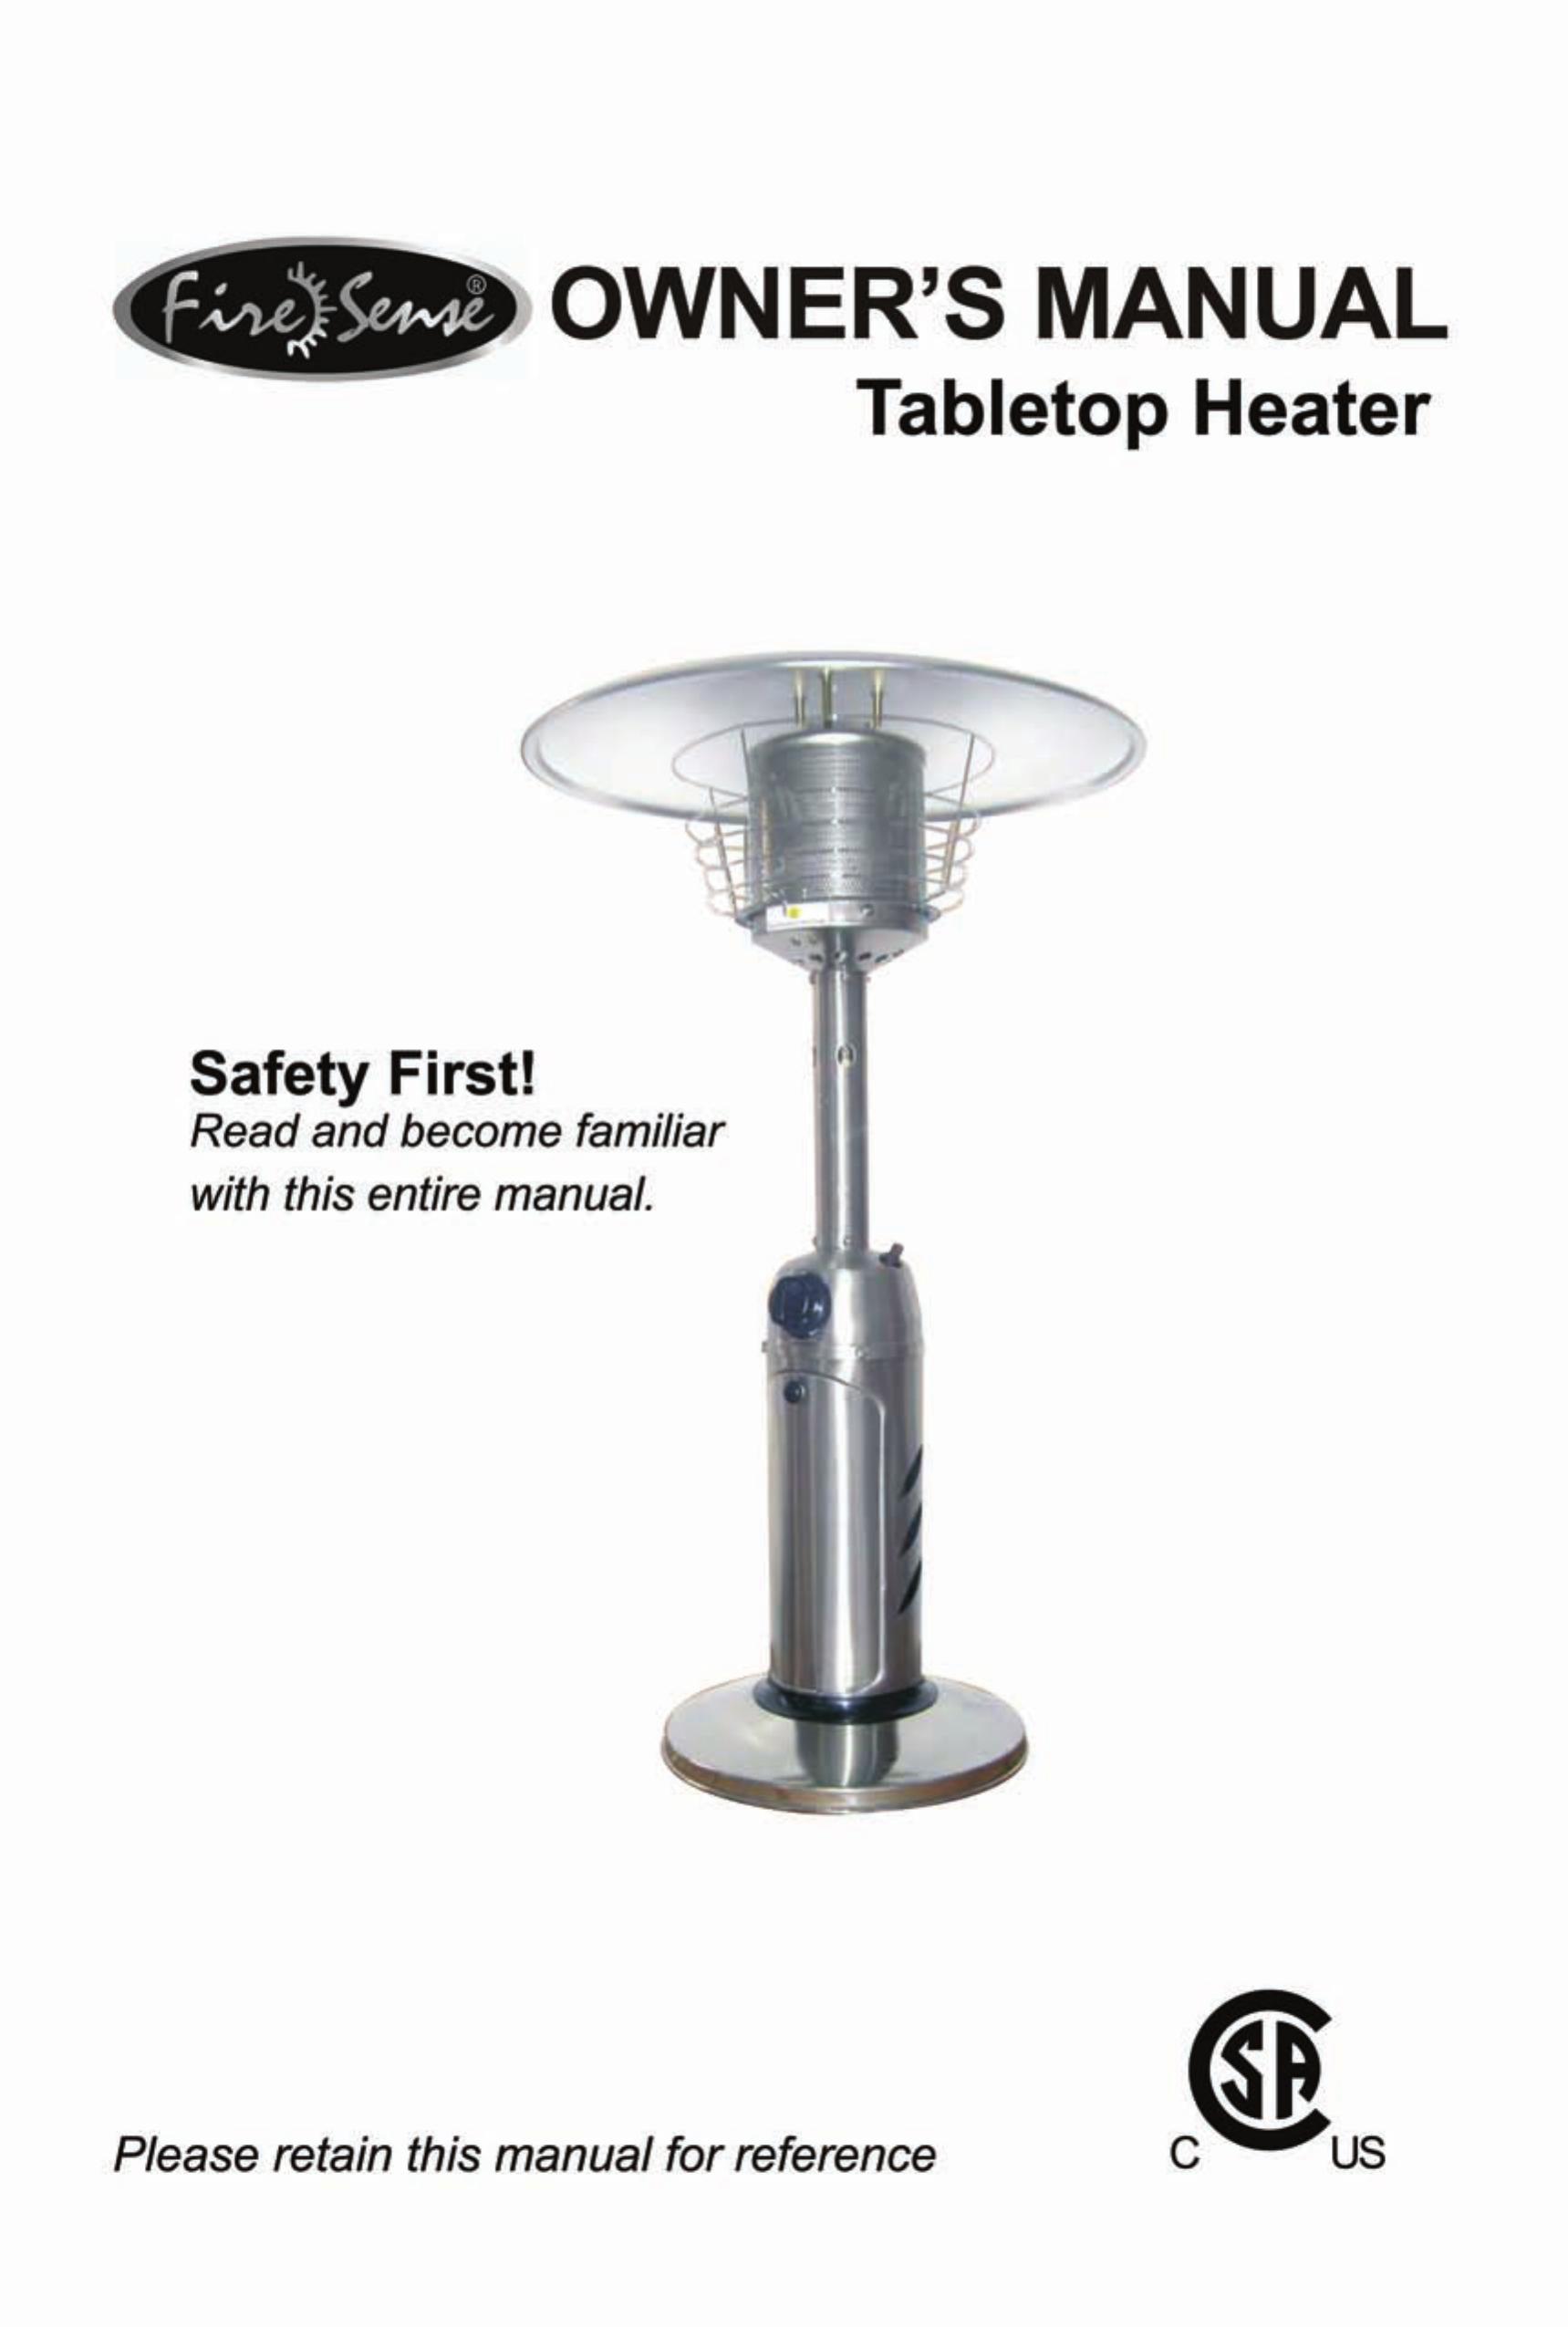 Well Traveled Living 60485 Patio Heater User Manual